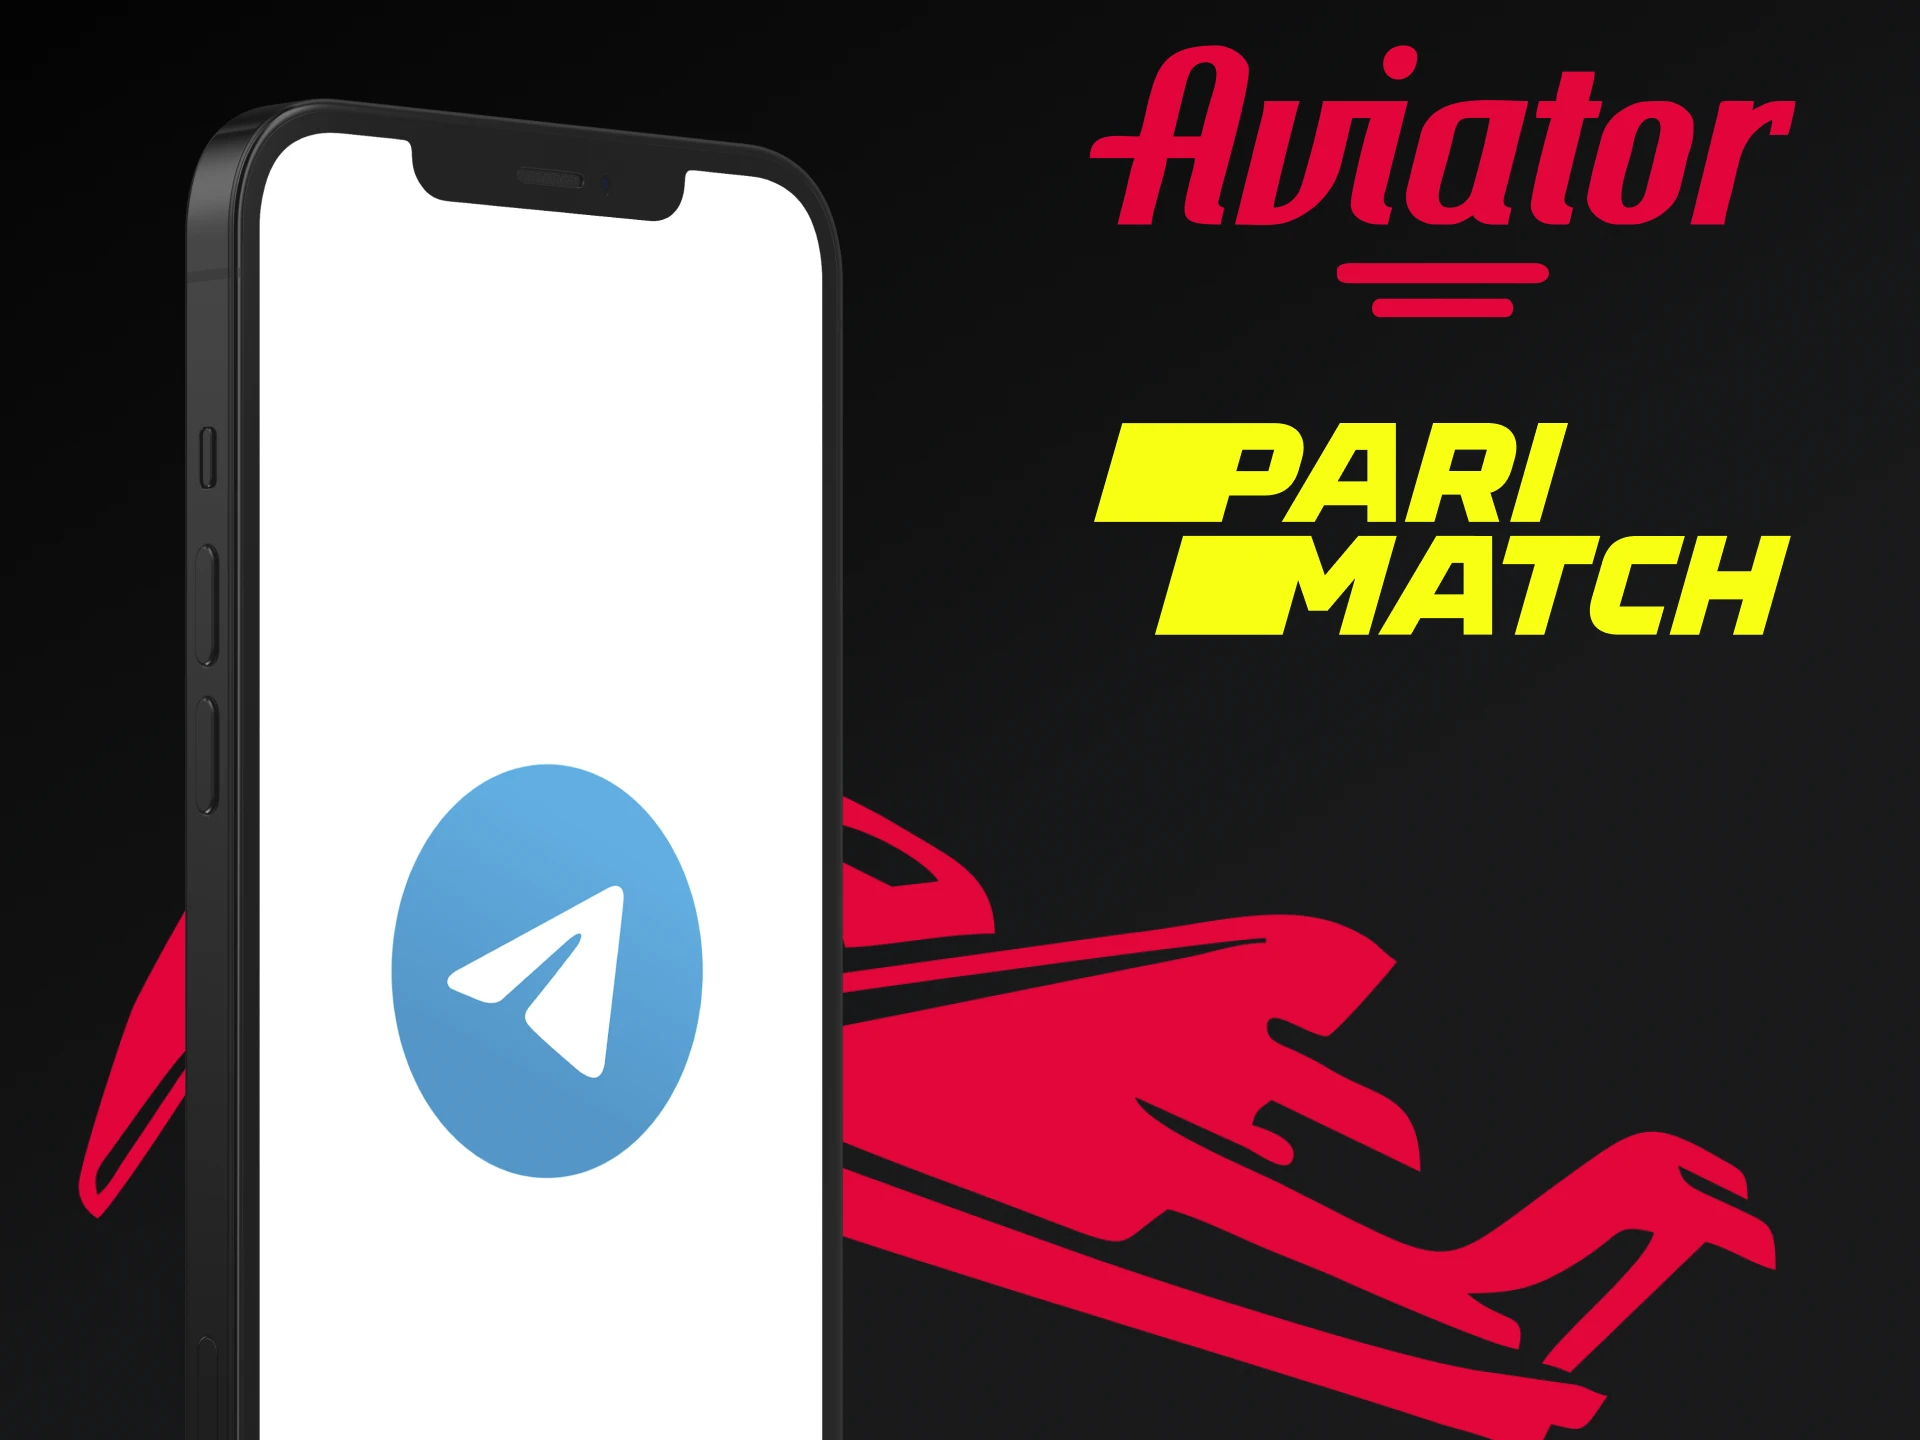 Use signal for Aviator from Parimatch.